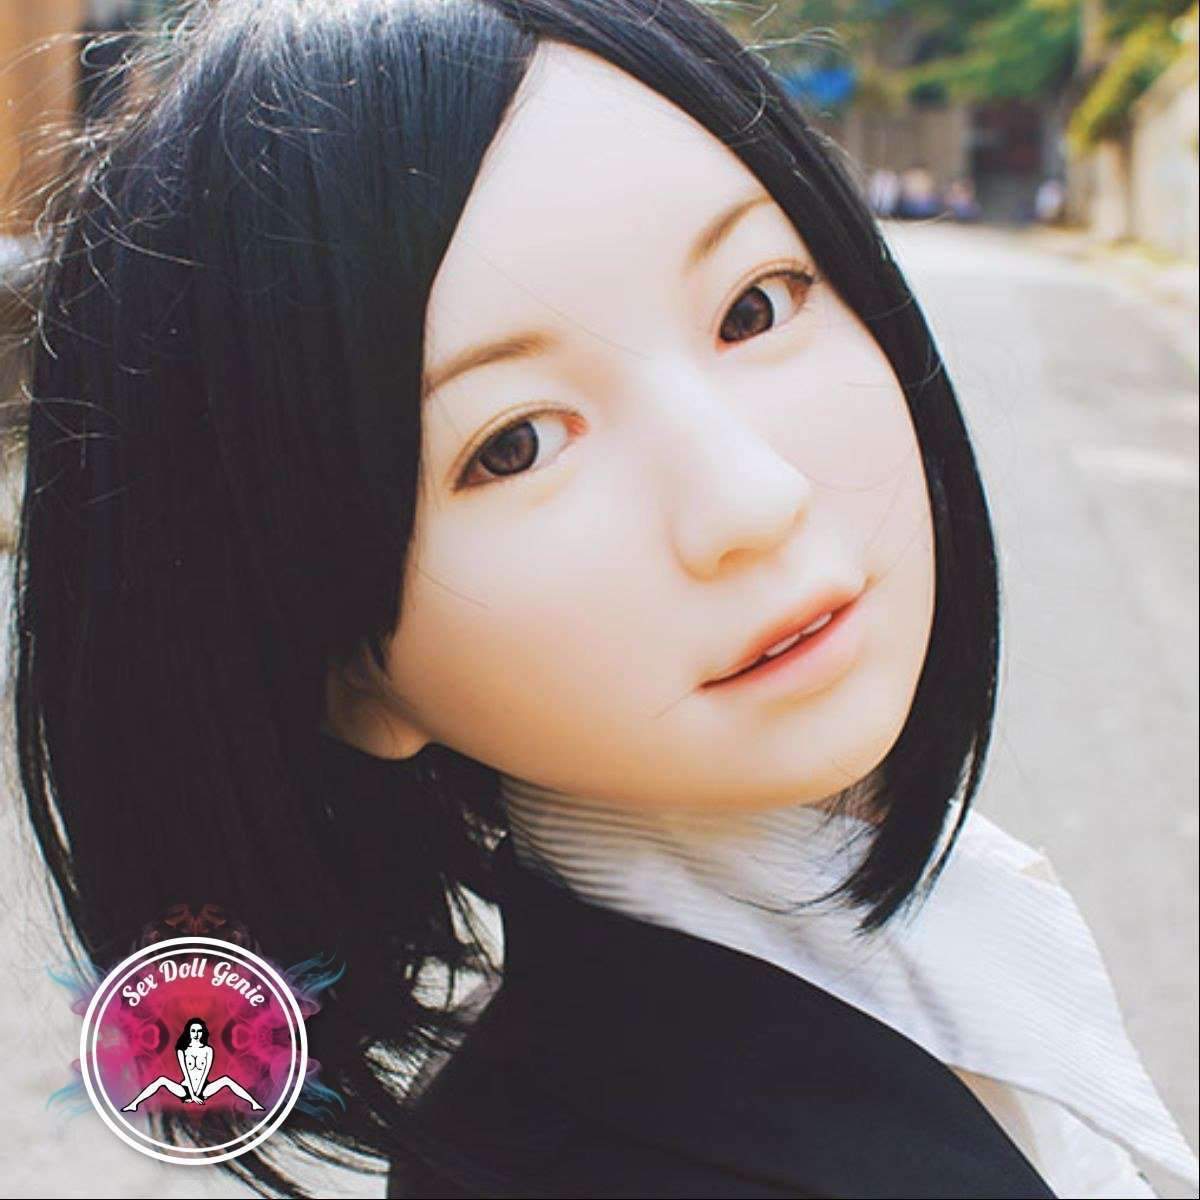 DS Doll - 158Plus - Nanase Head - Type 1 D Cup Silicone Doll-8